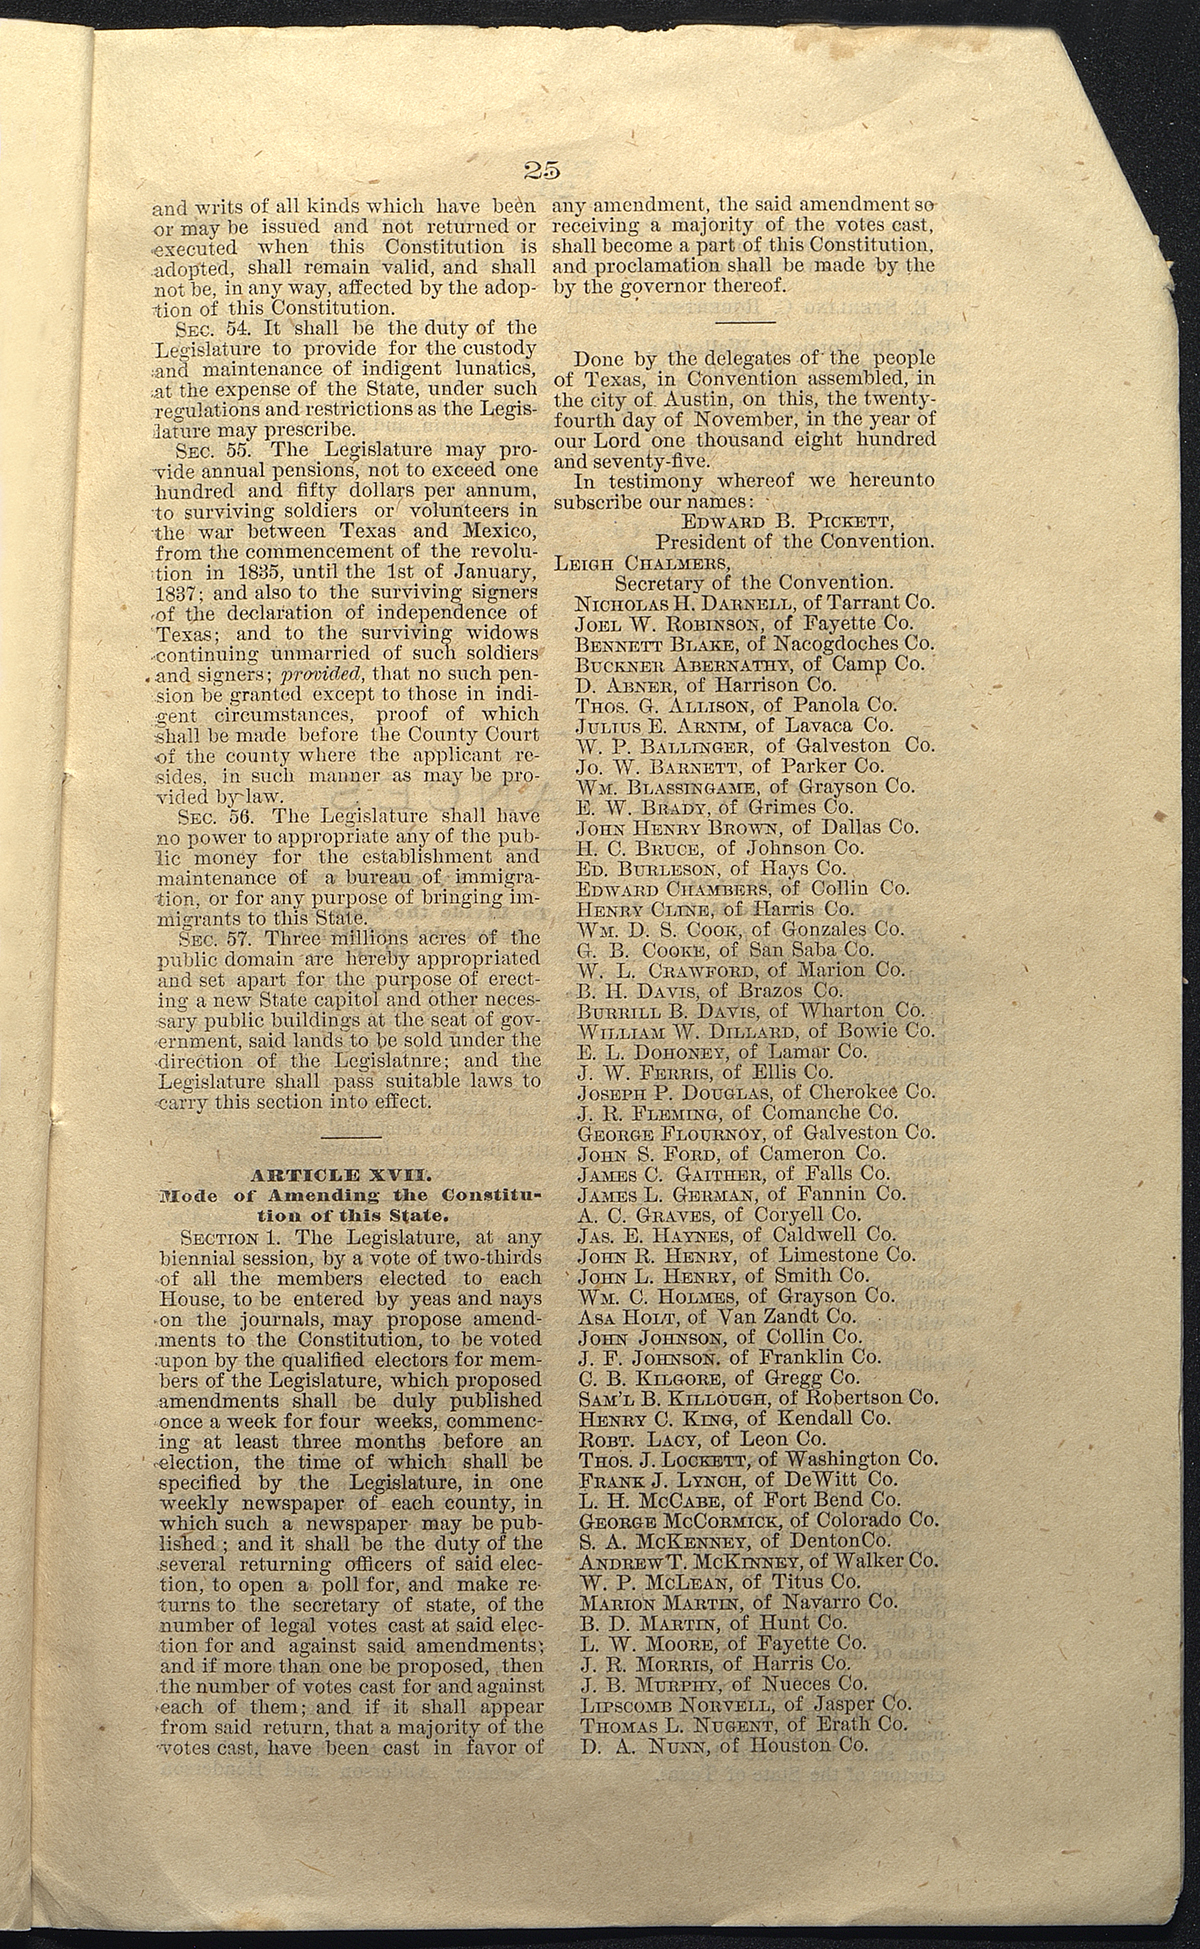 Article XVII, Section 1